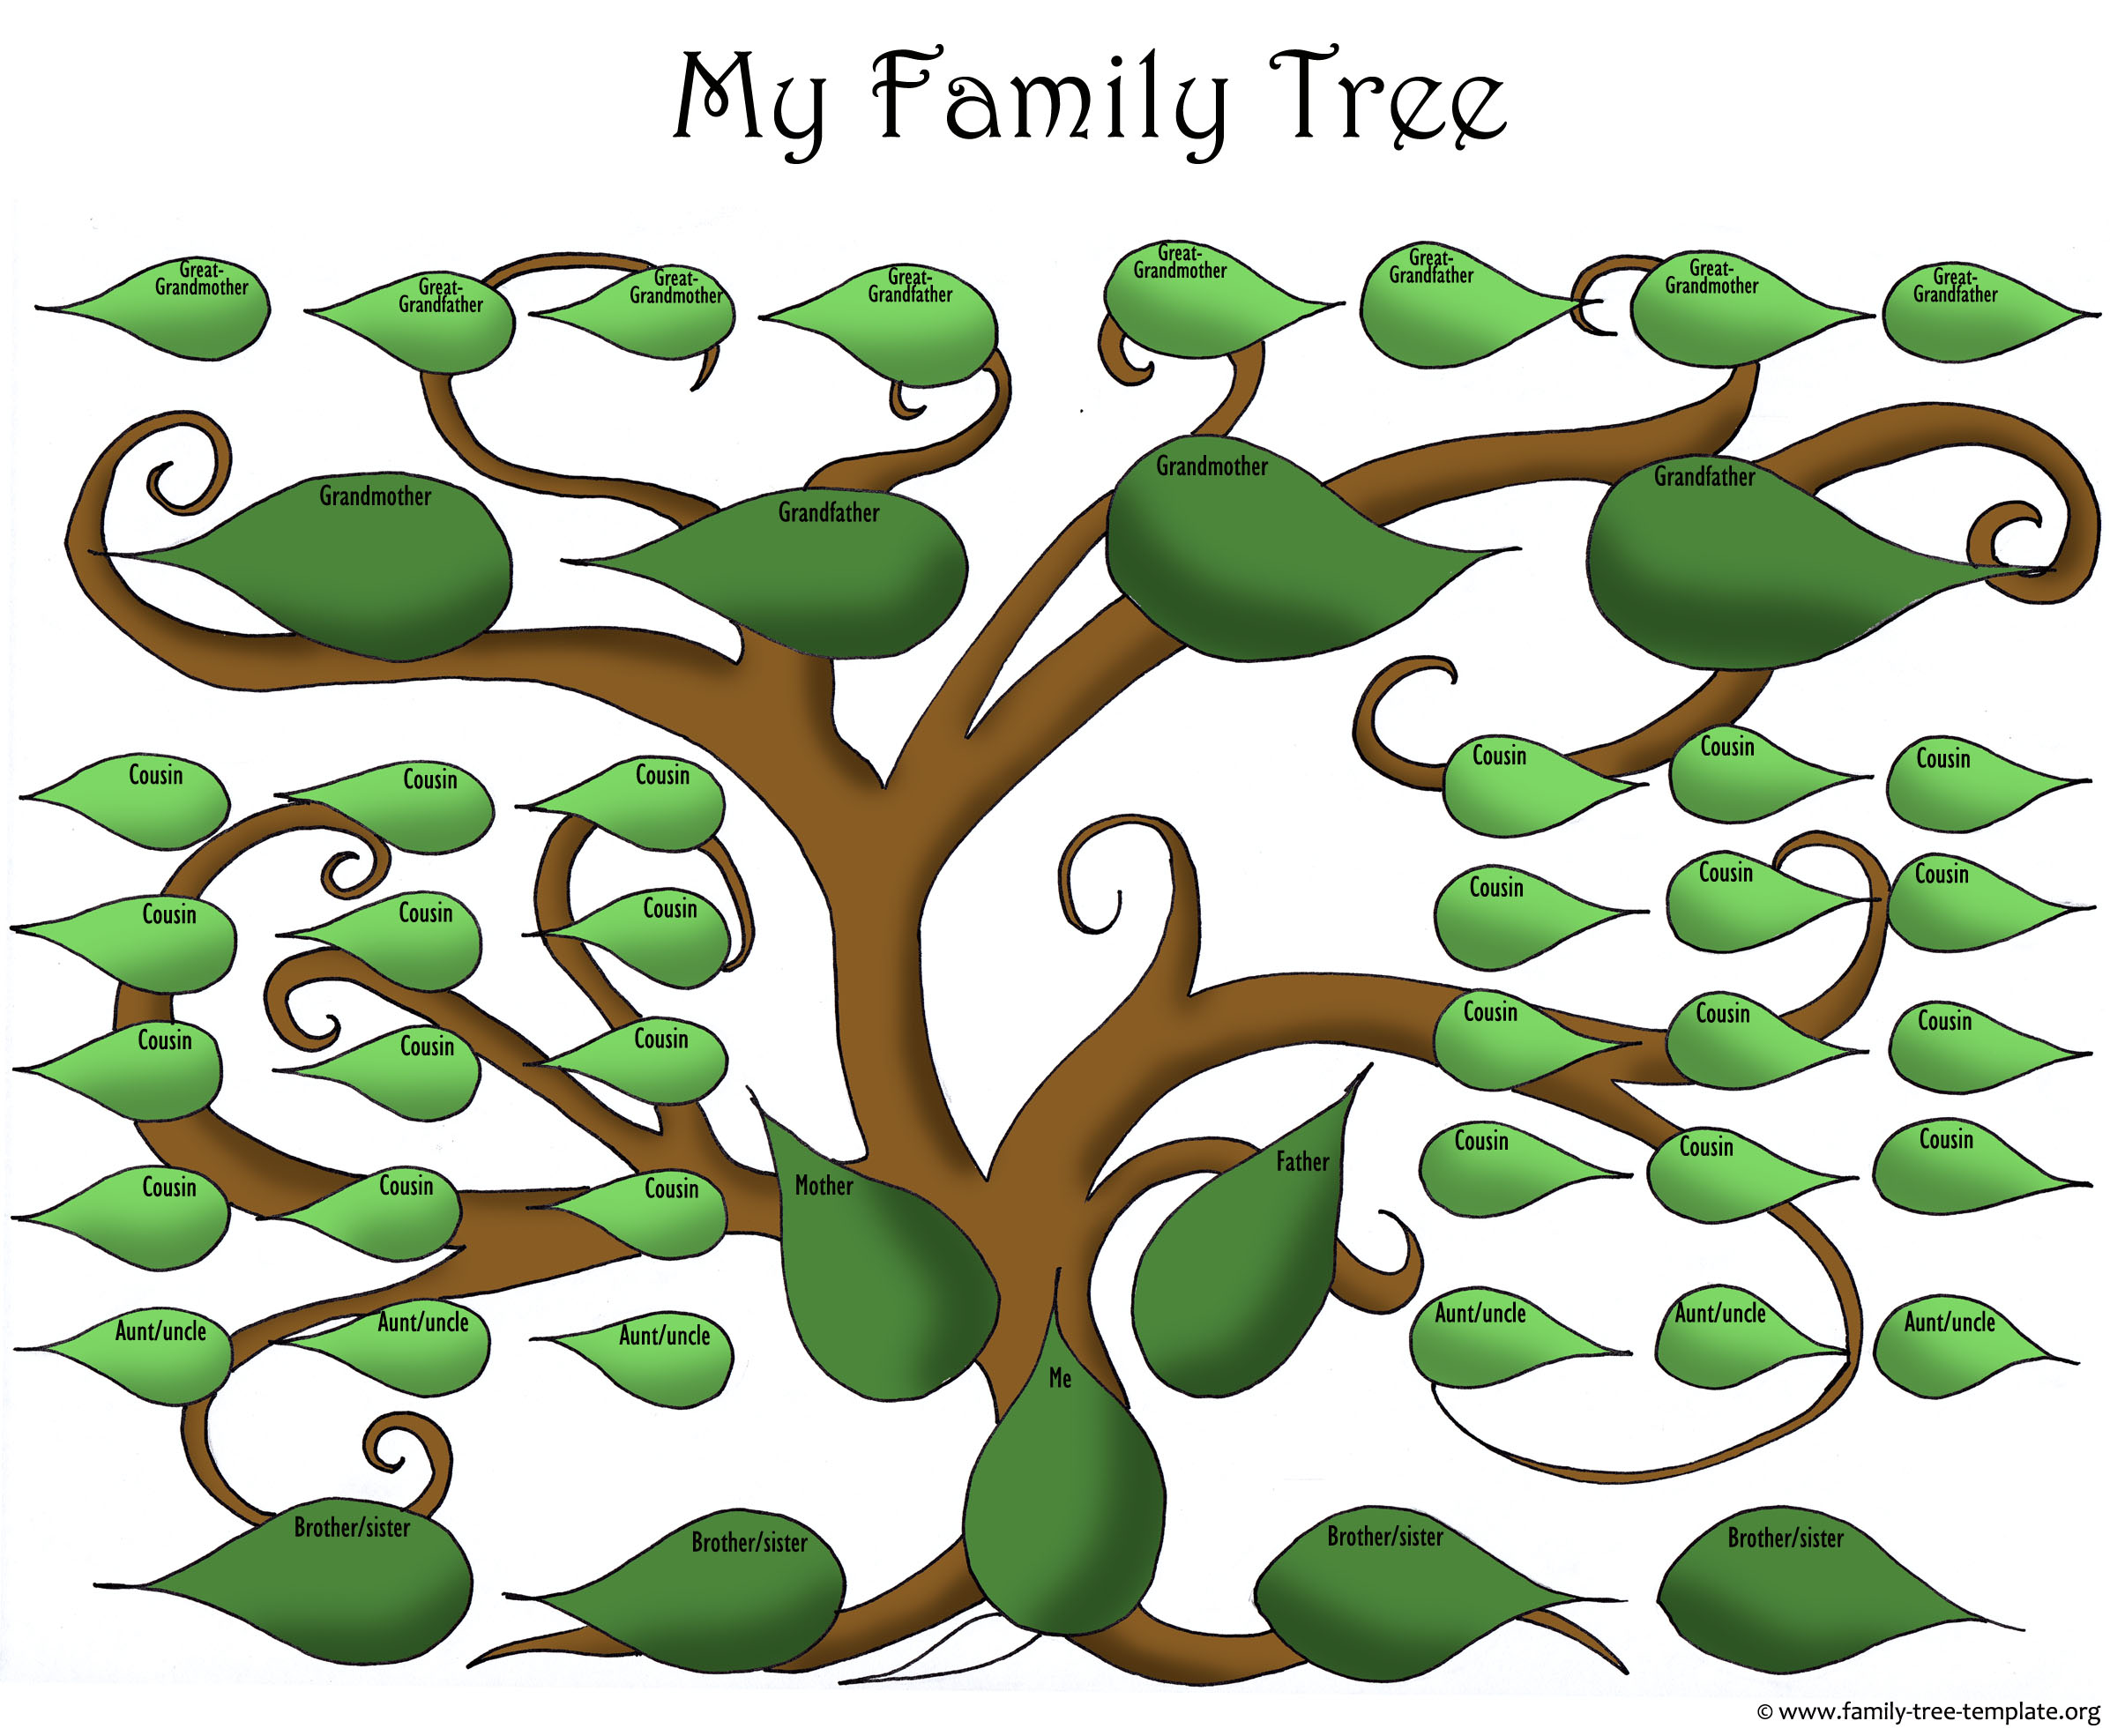 A Printable Blank Family Tree to Make Your Kids Genealogy Chart